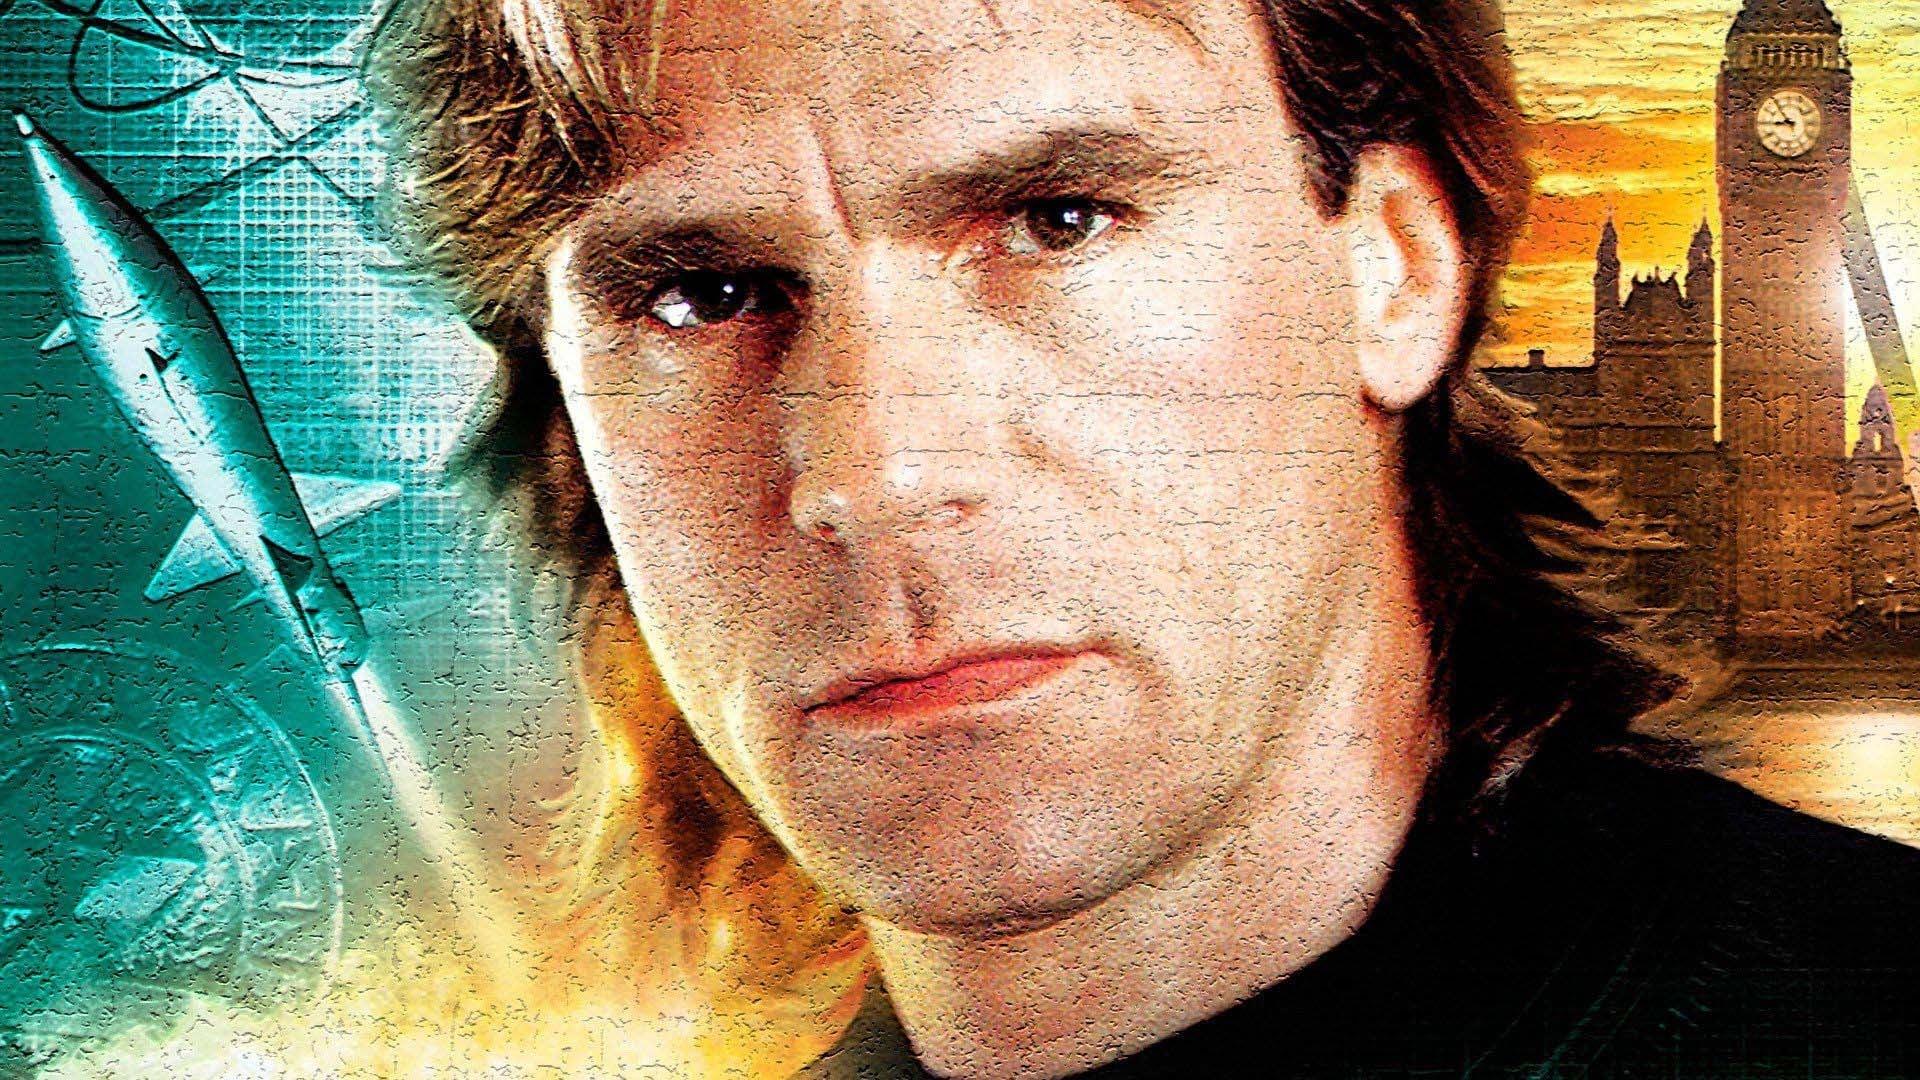 MacGyver: Trail to Doomsday backdrop